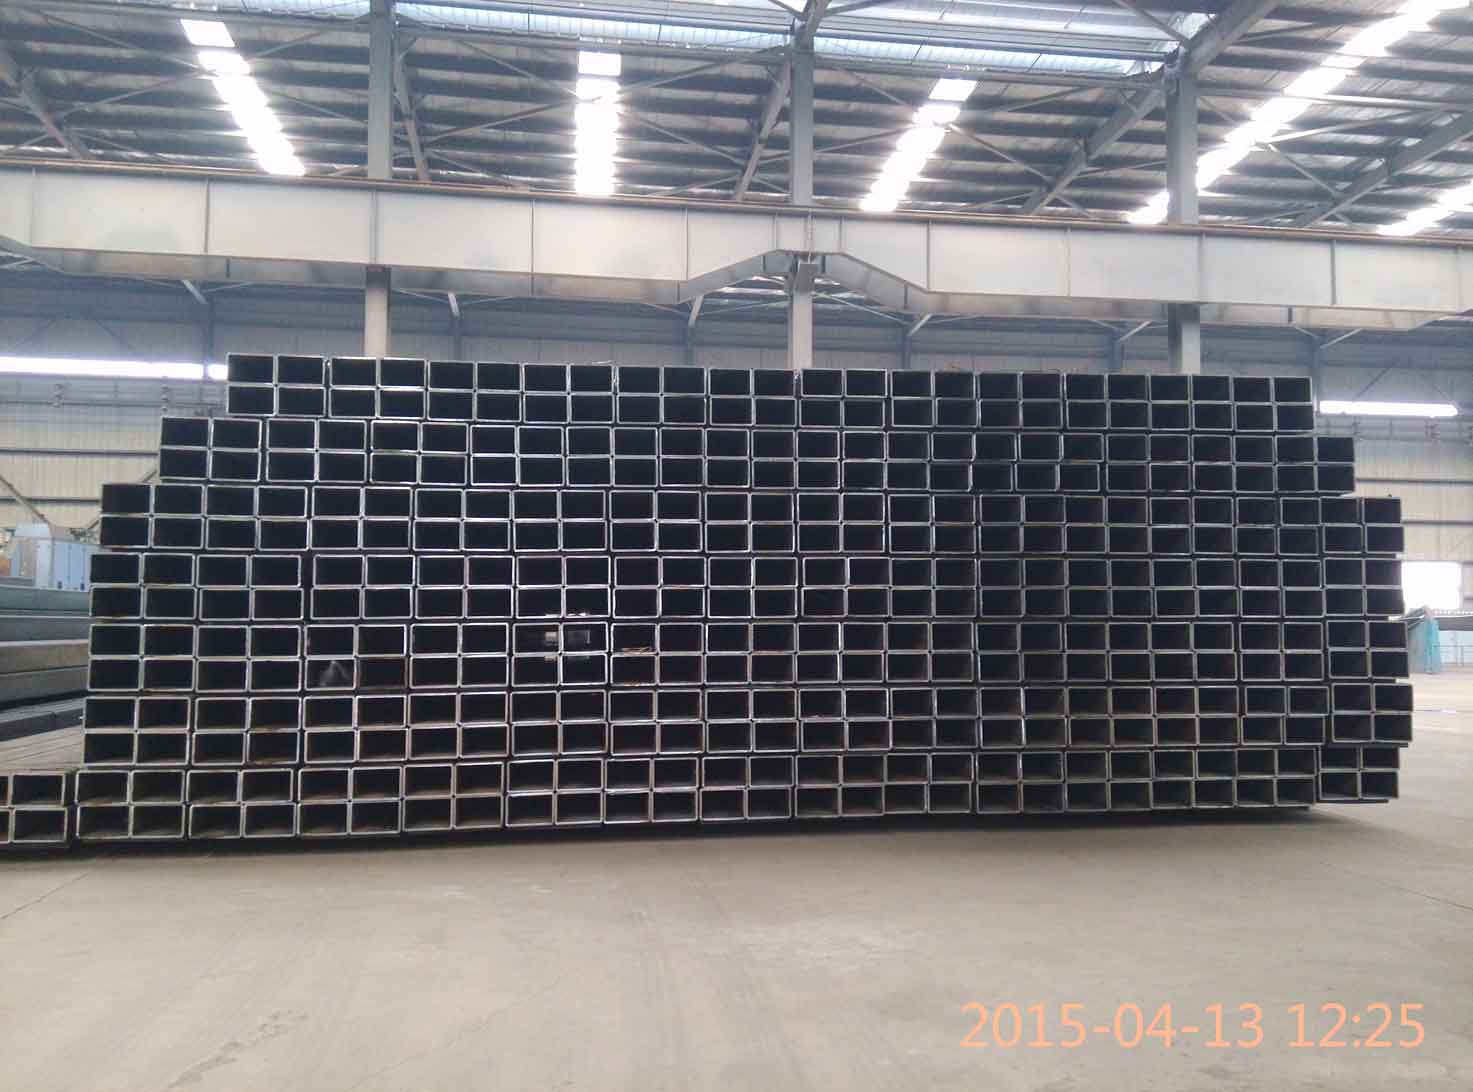 EN10210 S355J0H rectangular square steel hollow section pipe in China Dongpengboda